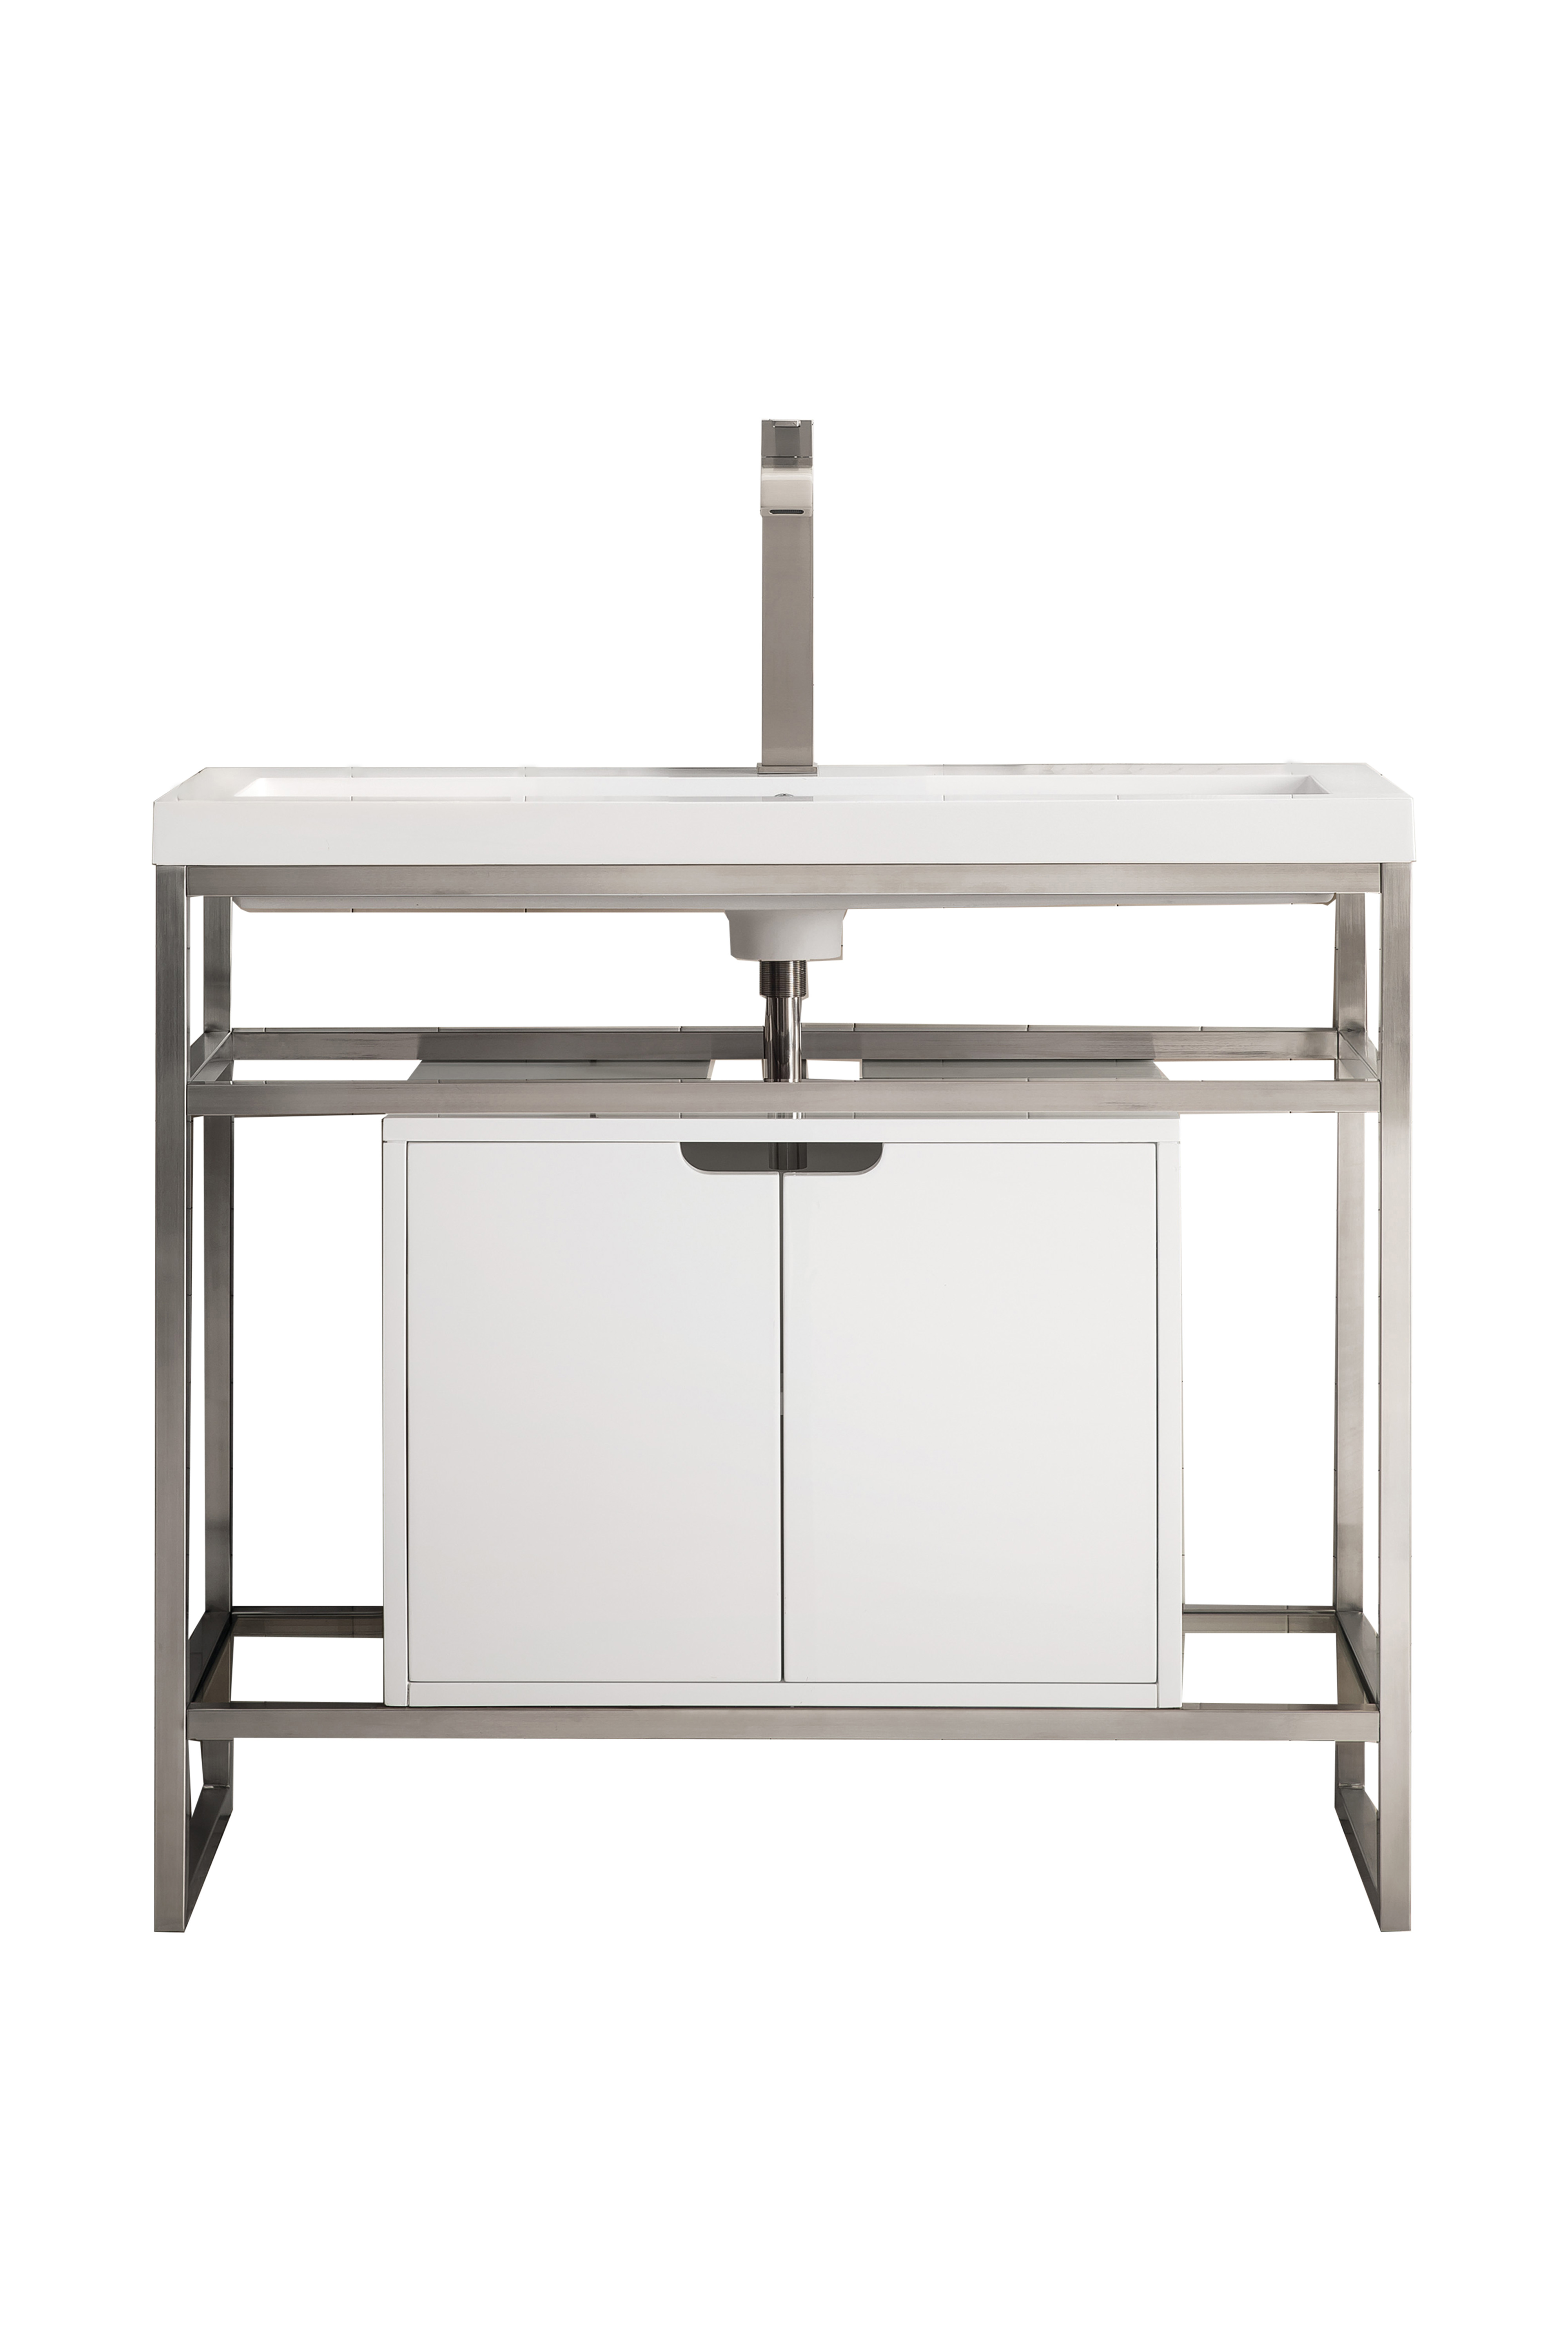 James Martin C105V39.5BNKSCGWWG Boston 39.5" Stainless Steel Sink Console, Brushed Nickel w/ Glossy White Storage Cabinet, White Glossy Composite Countertop